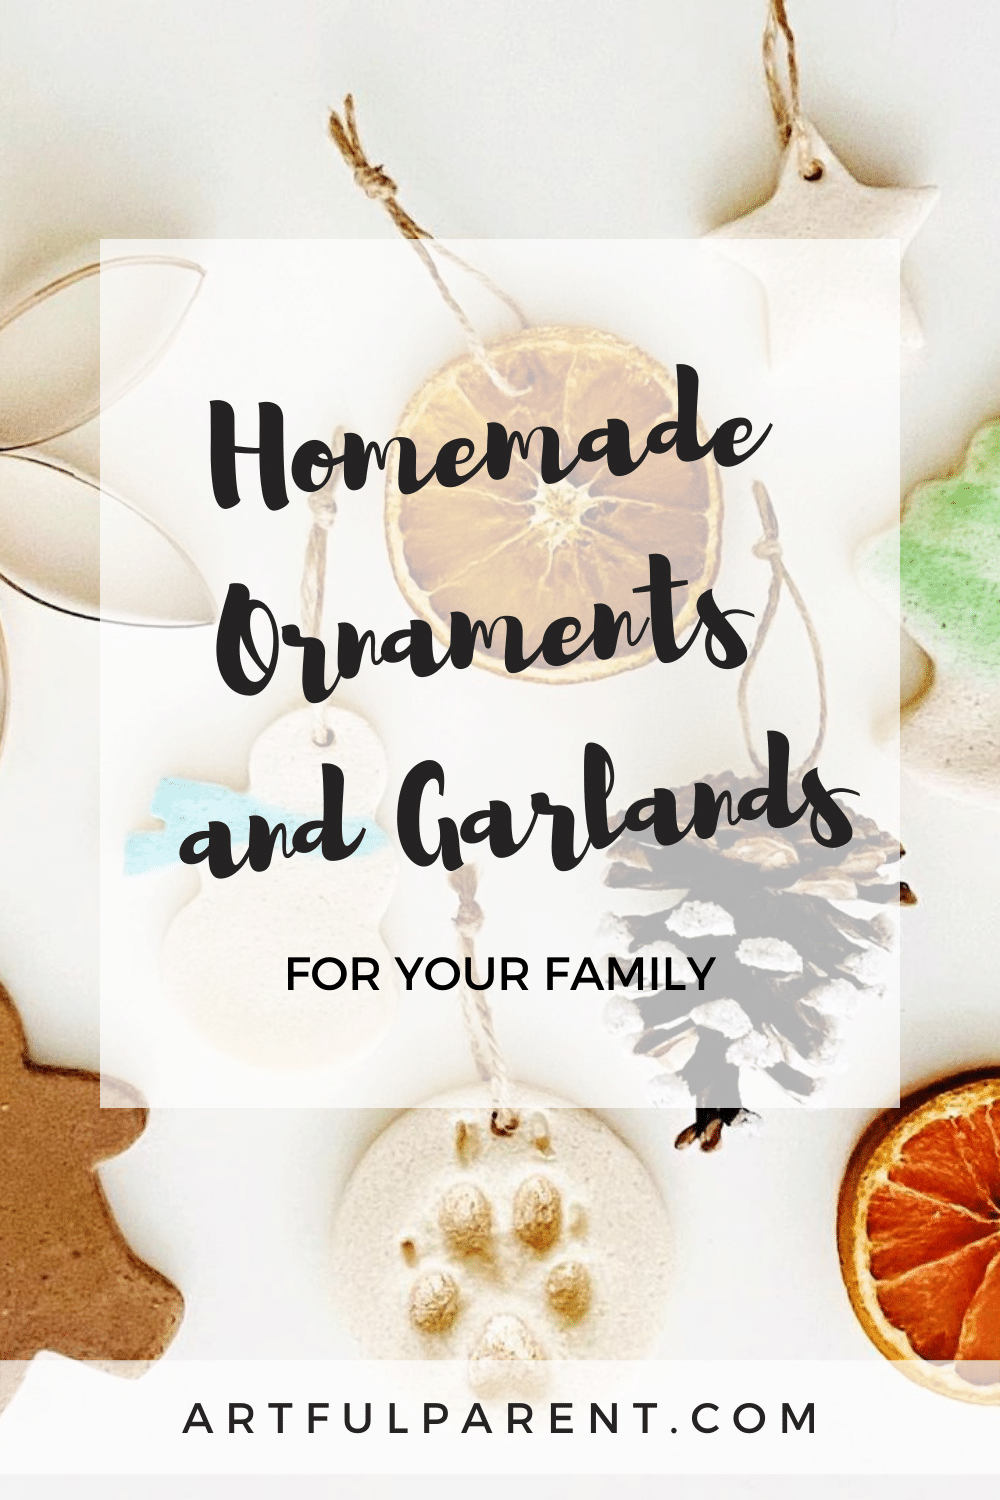 20 Homemade Christmas Ornaments + Garlands for Your Family